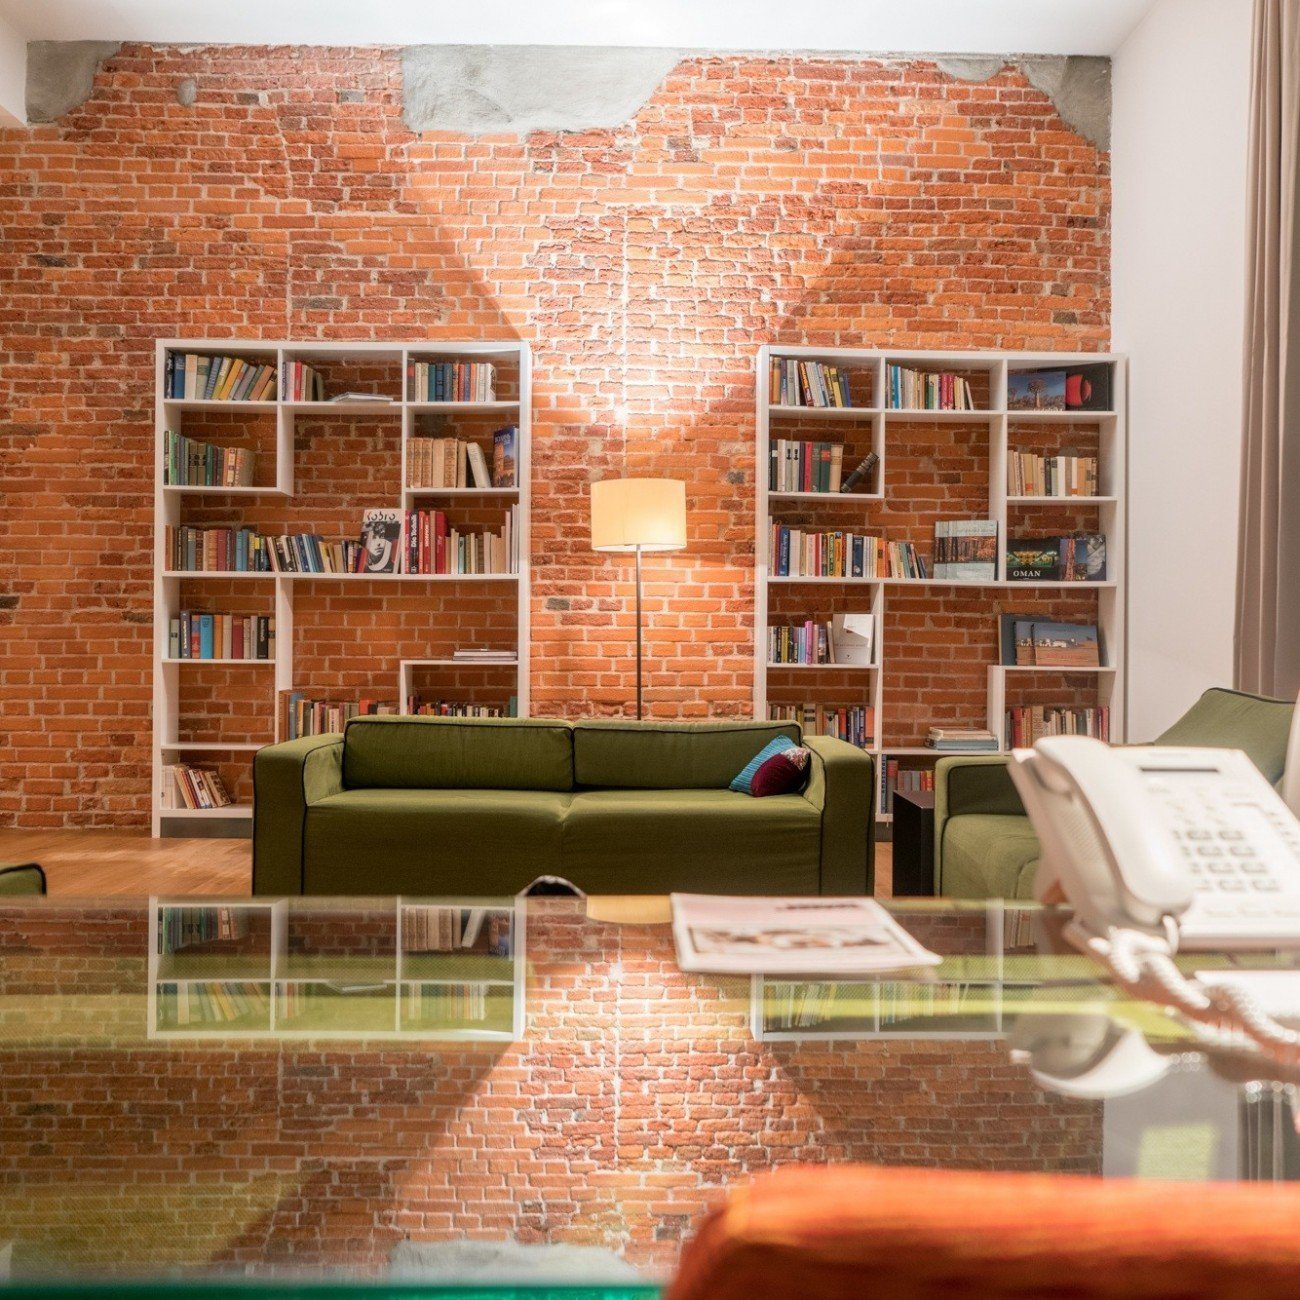 Vienna House Andel's Lodz: upscale hotel in a former textile factory 10